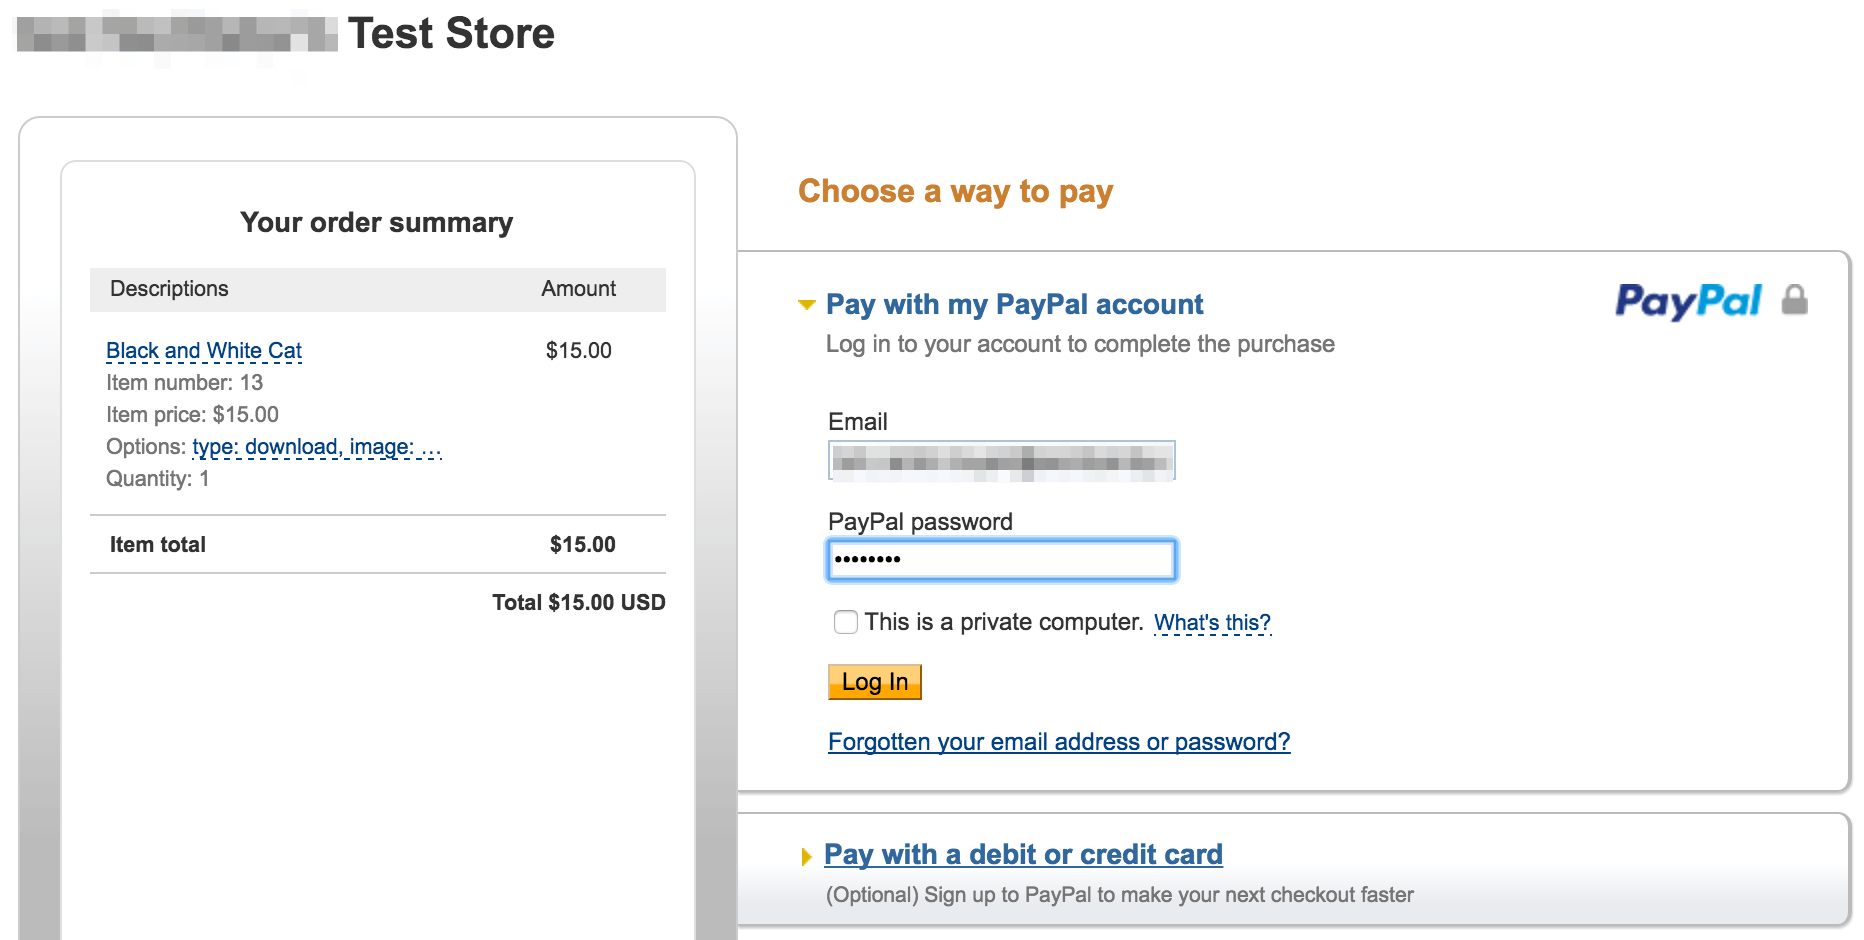 The PayPal login screen.